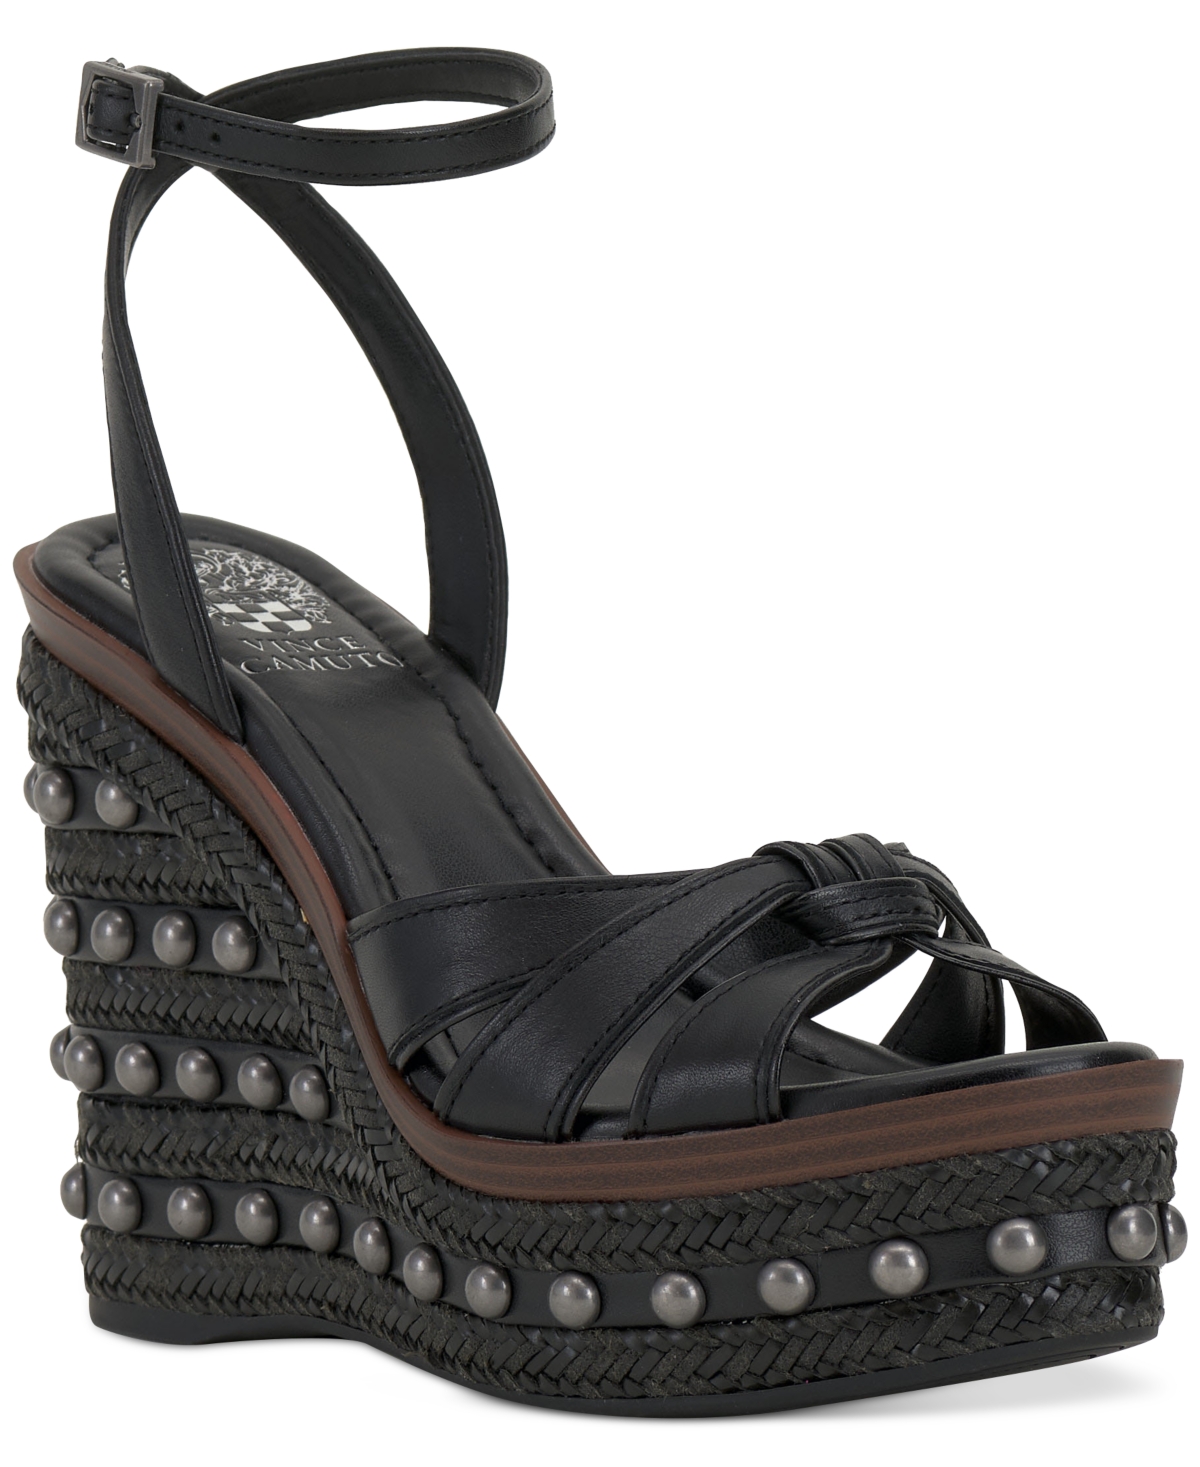 VINCE CAMUTO PACCI STUDDED PLATFORM WEDGE SANDALS WOMEN'S SHOES